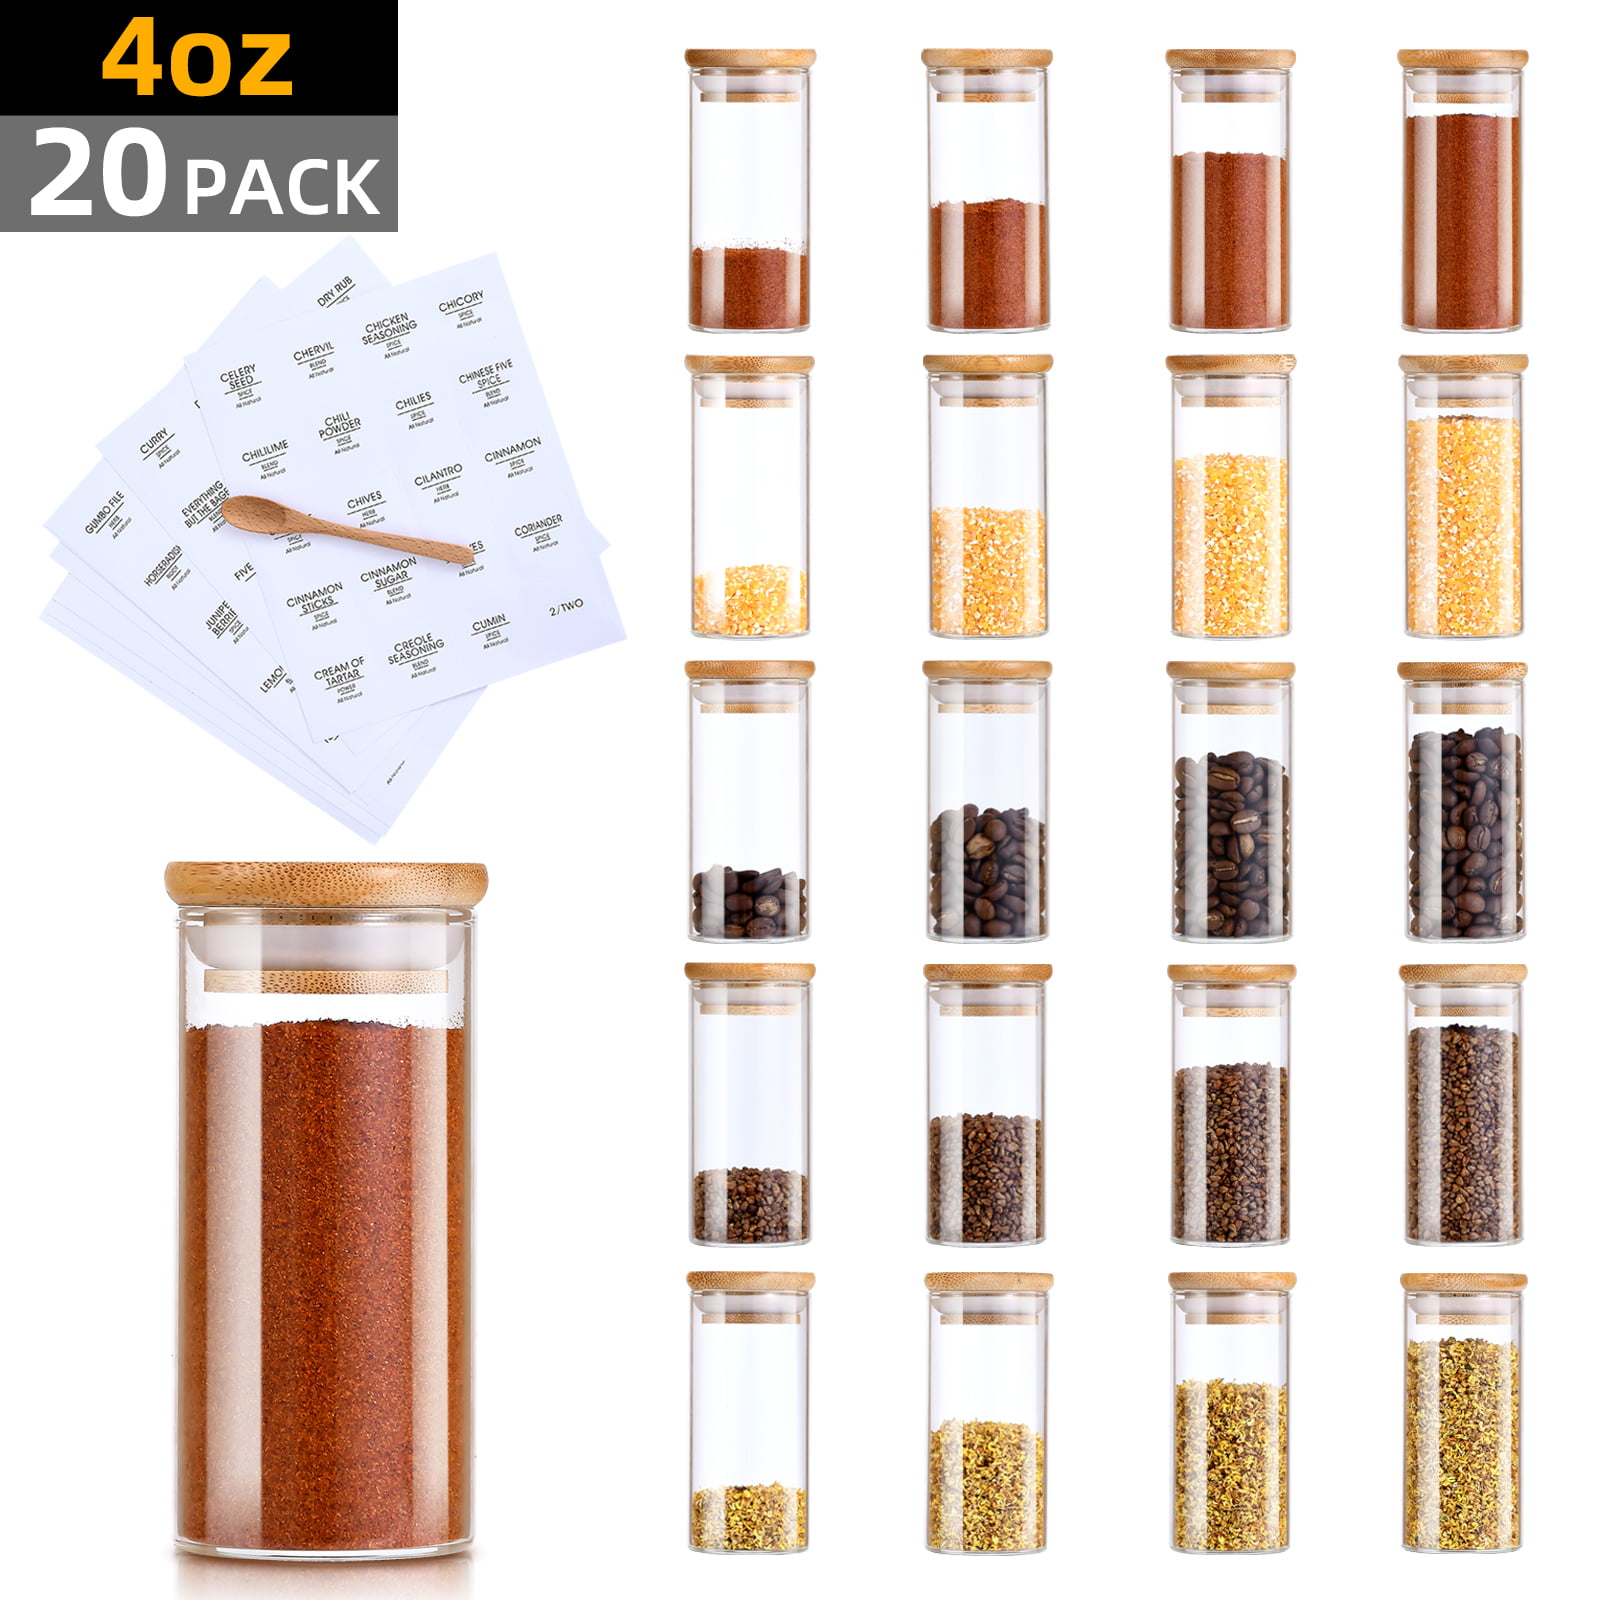  Datttcc 25 Pack Glass Spice jars Sets with Bamboo Lids,4 OZ  Spice Jars with Labels and Chalk,Seasoning Jars for Home Kitchen,Spice,Tea,Sugar,Salt,Herbs  : Home & Kitchen